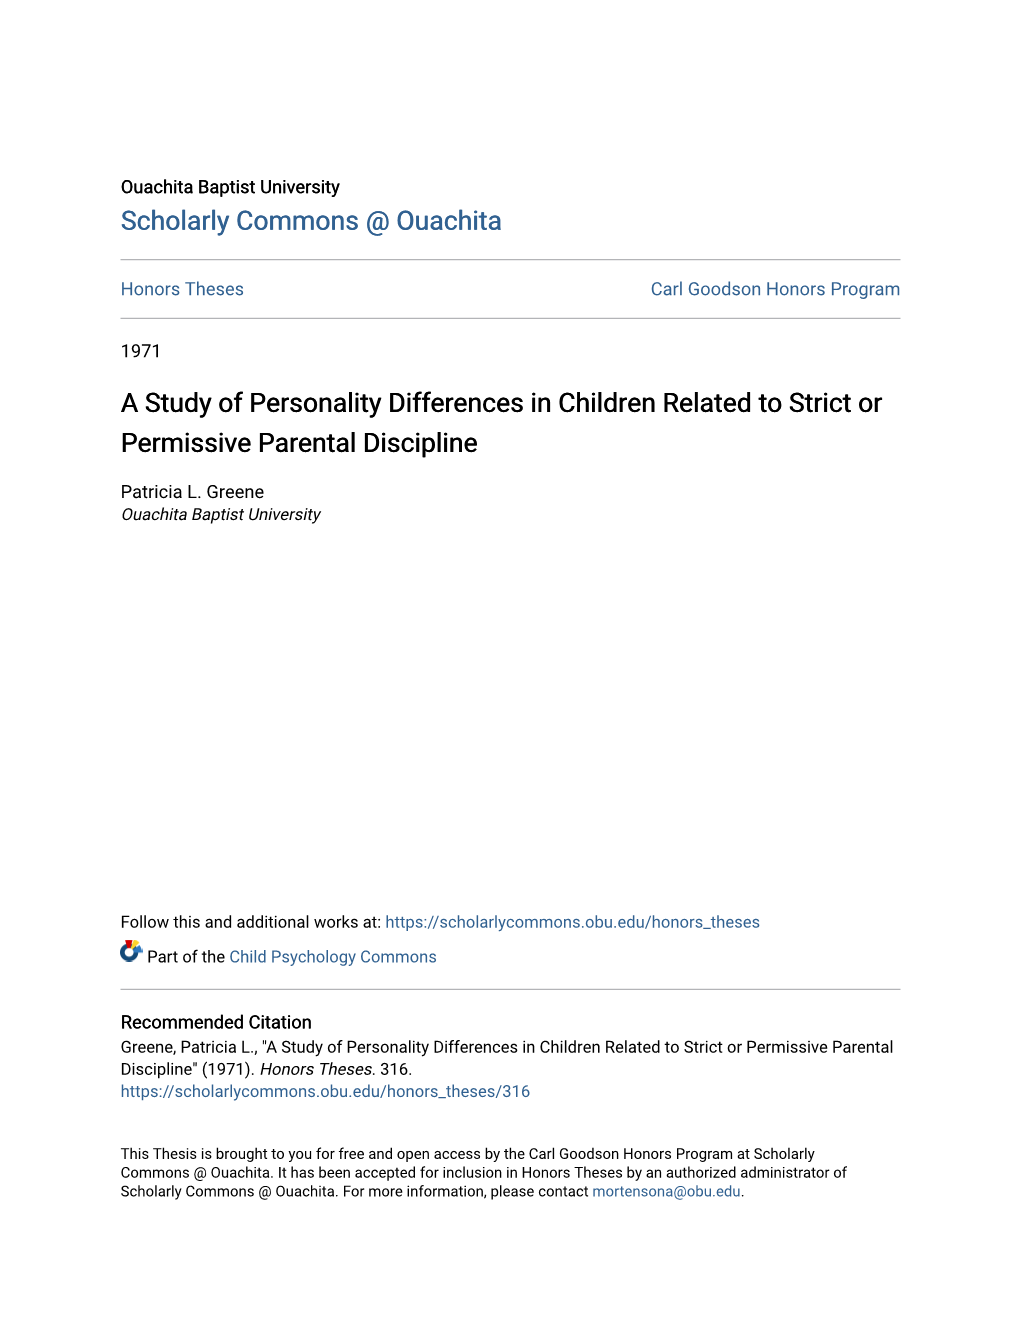 A Study of Personality Differences in Children Related to Strict Or Permissive Parental Discipline